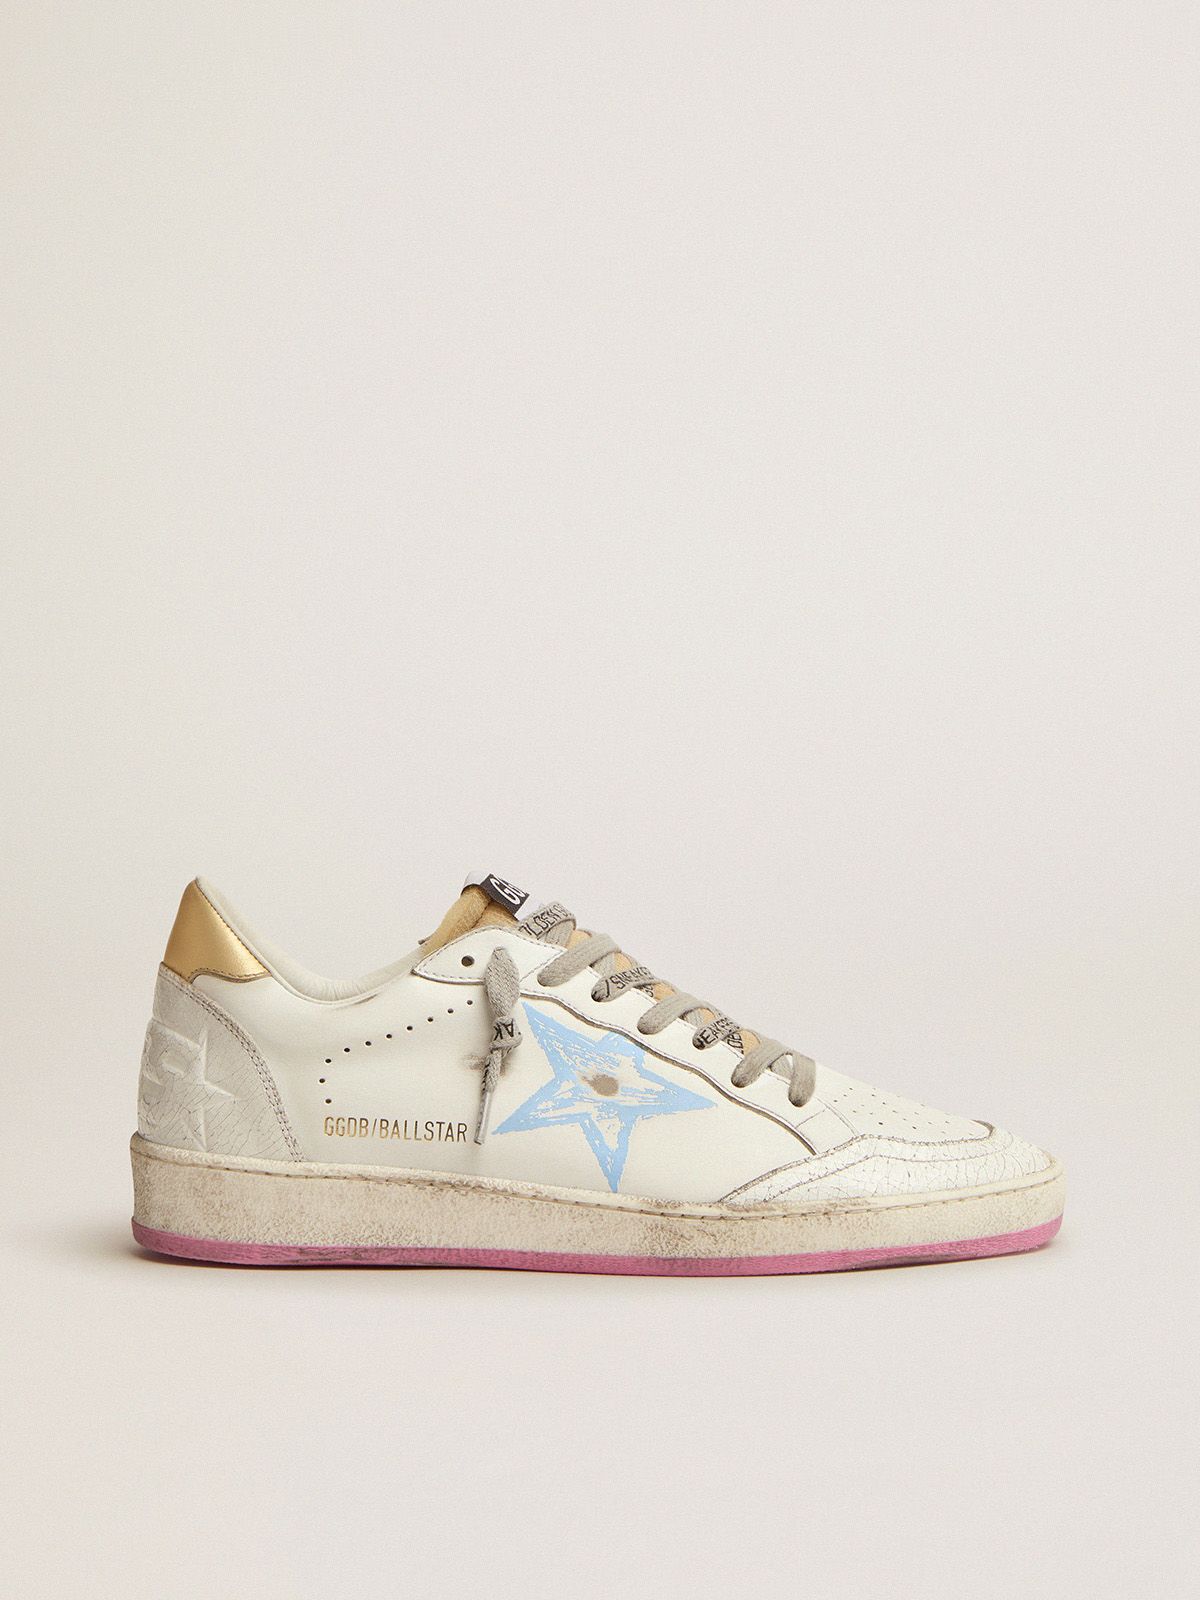 Golden Goose Sneakers Donna Ball Star sneakers with gold laminated leather heel tab and foam rubber tongue